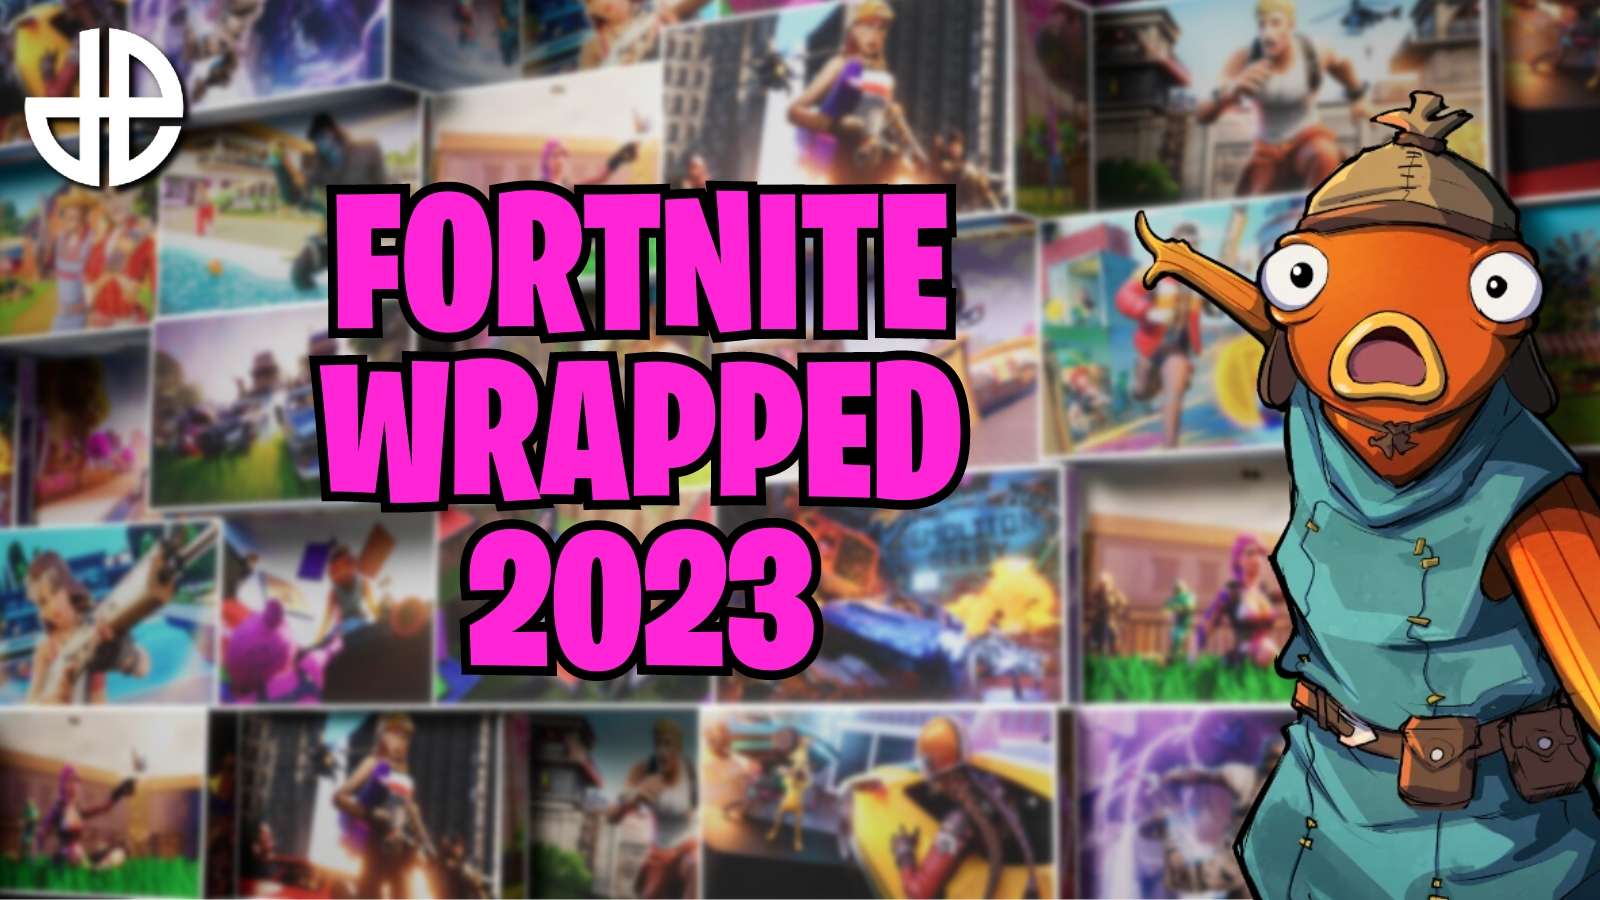 Fortnite Wrapped 2023 cover